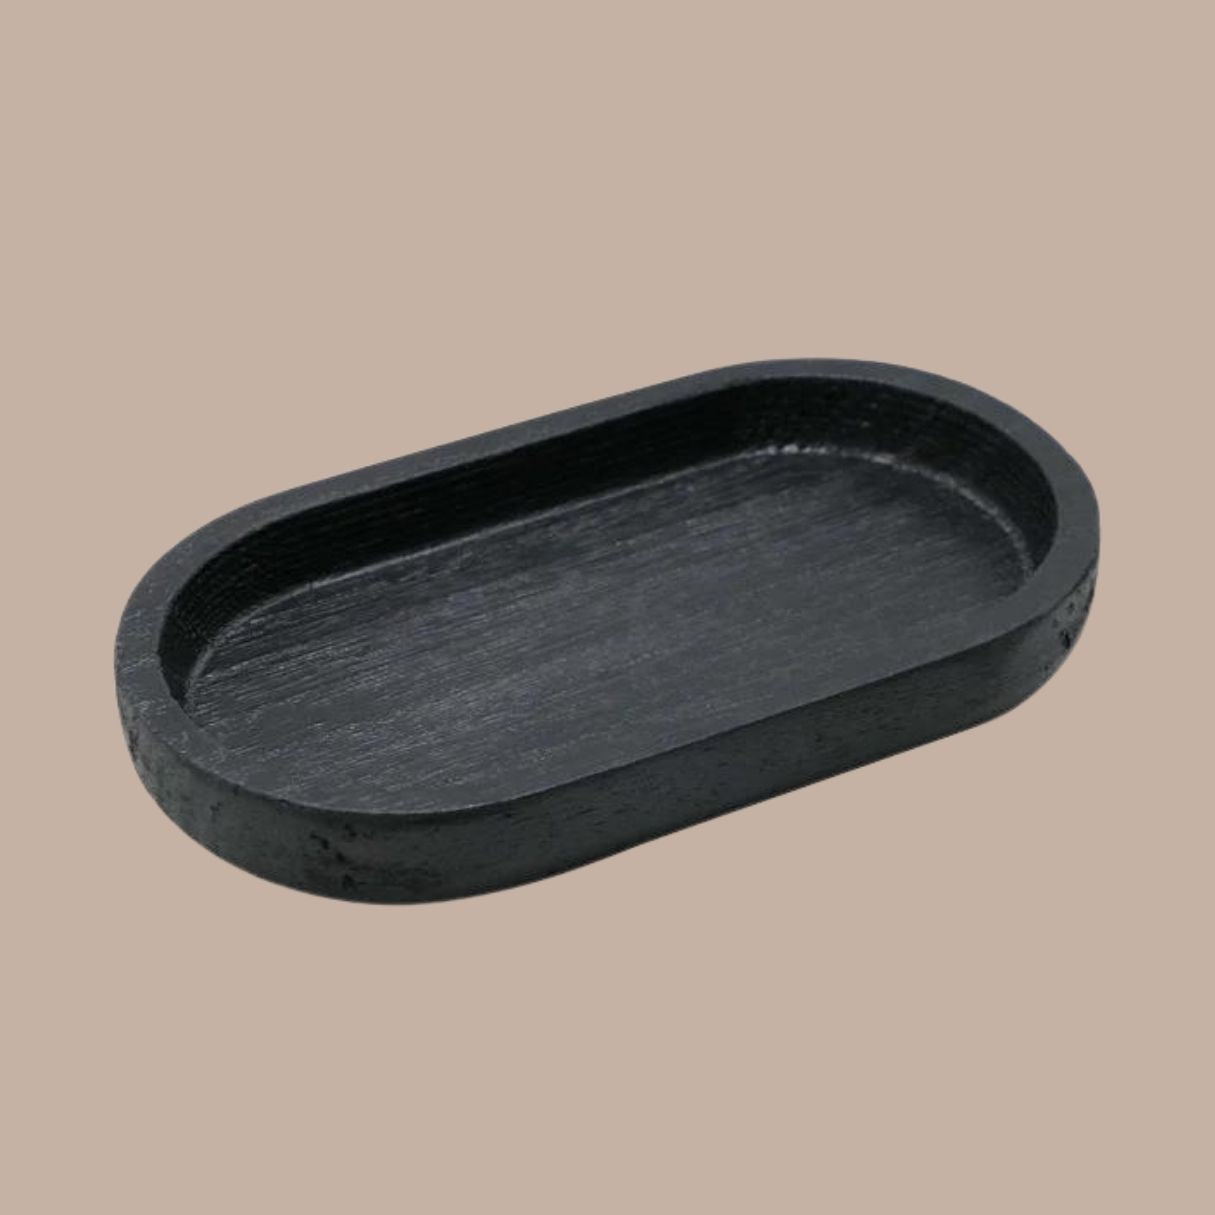 Black Wood Tray SMALL - Sweet Water Decor - Box Builder Item - KINSHIP GIFT - housewarming, housewarming gift, LDT:GW:RESTRICT, Men, Sweet Water Decor - Pittsburgh - gift - boxes - gift - baskets - corporate - gifts - holiday - gifts